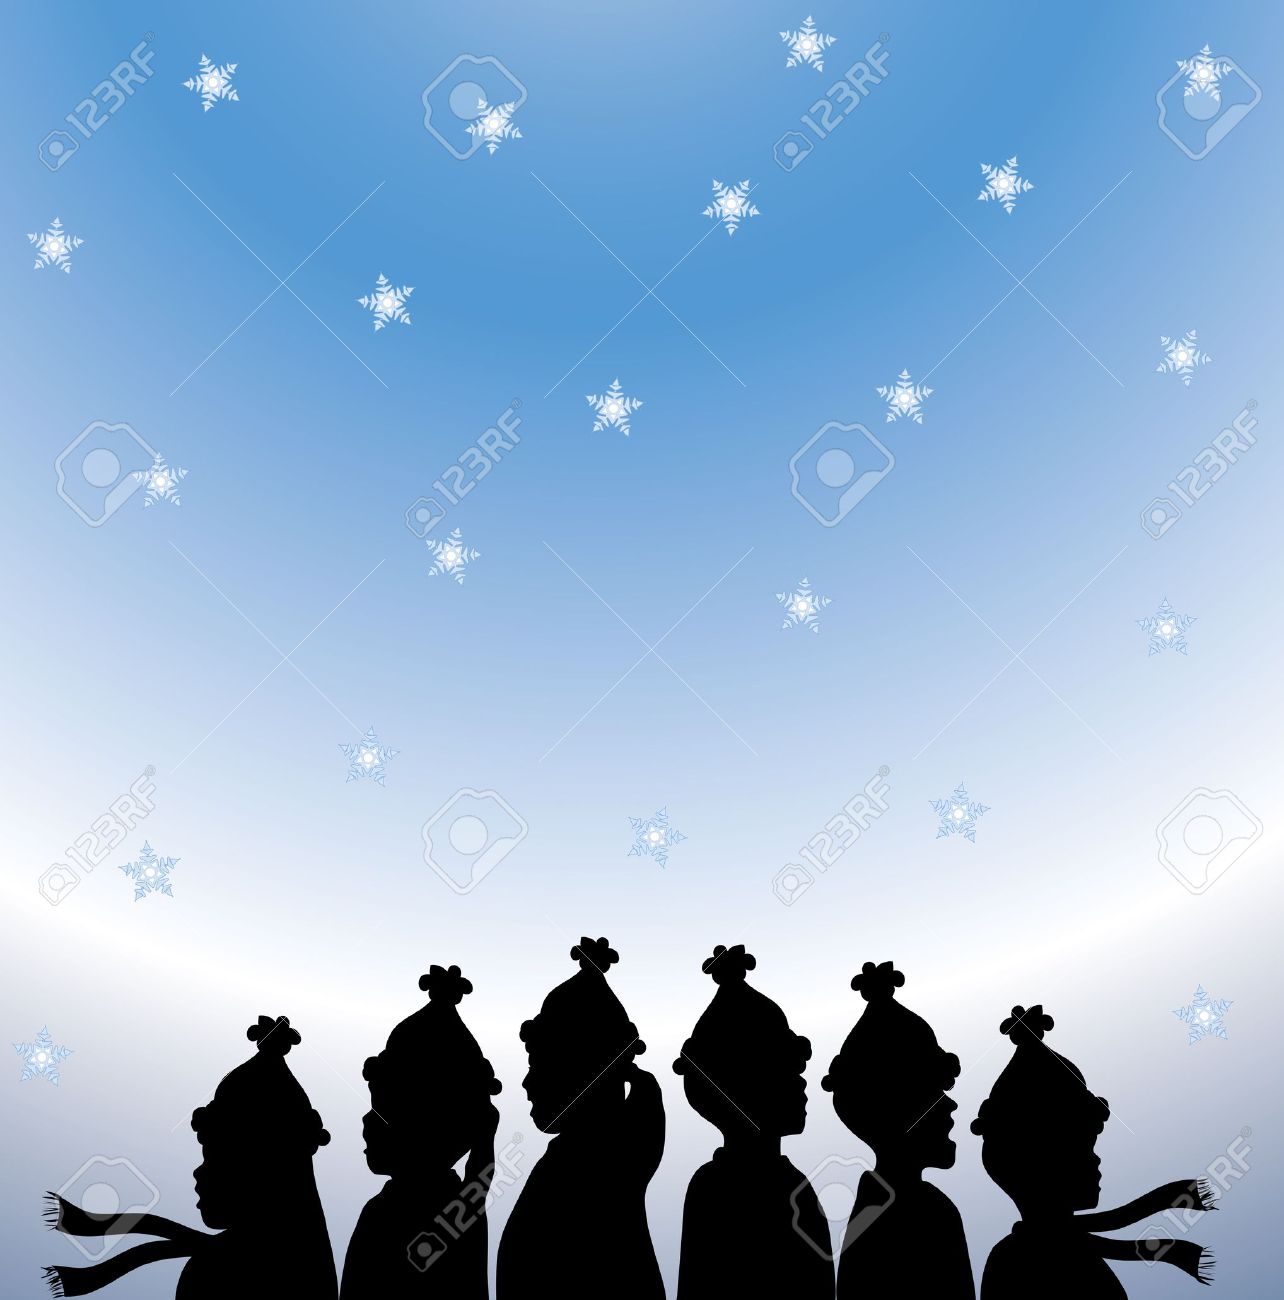 Silhouette Of Christmas Carolers On Snowy Gradient Background